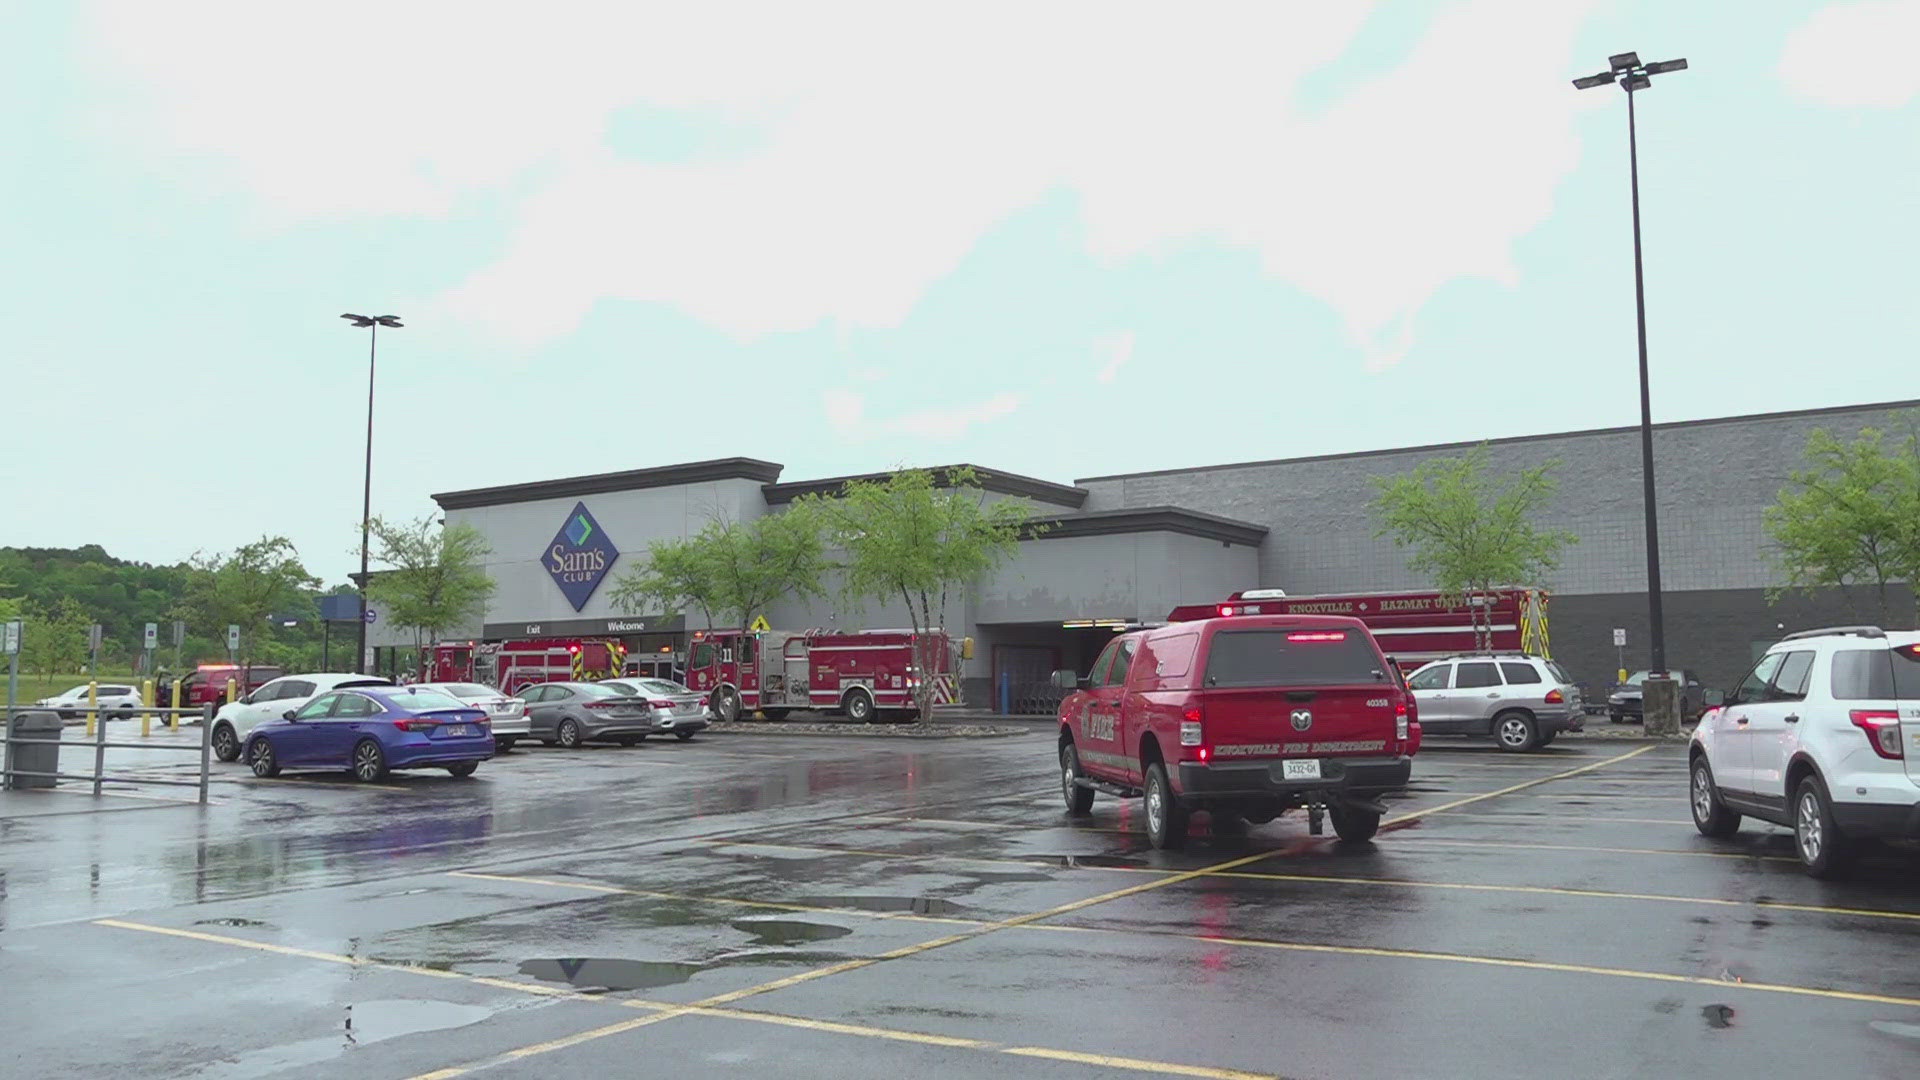 The Knoxville Fire Department said the leak was HVAC-related.